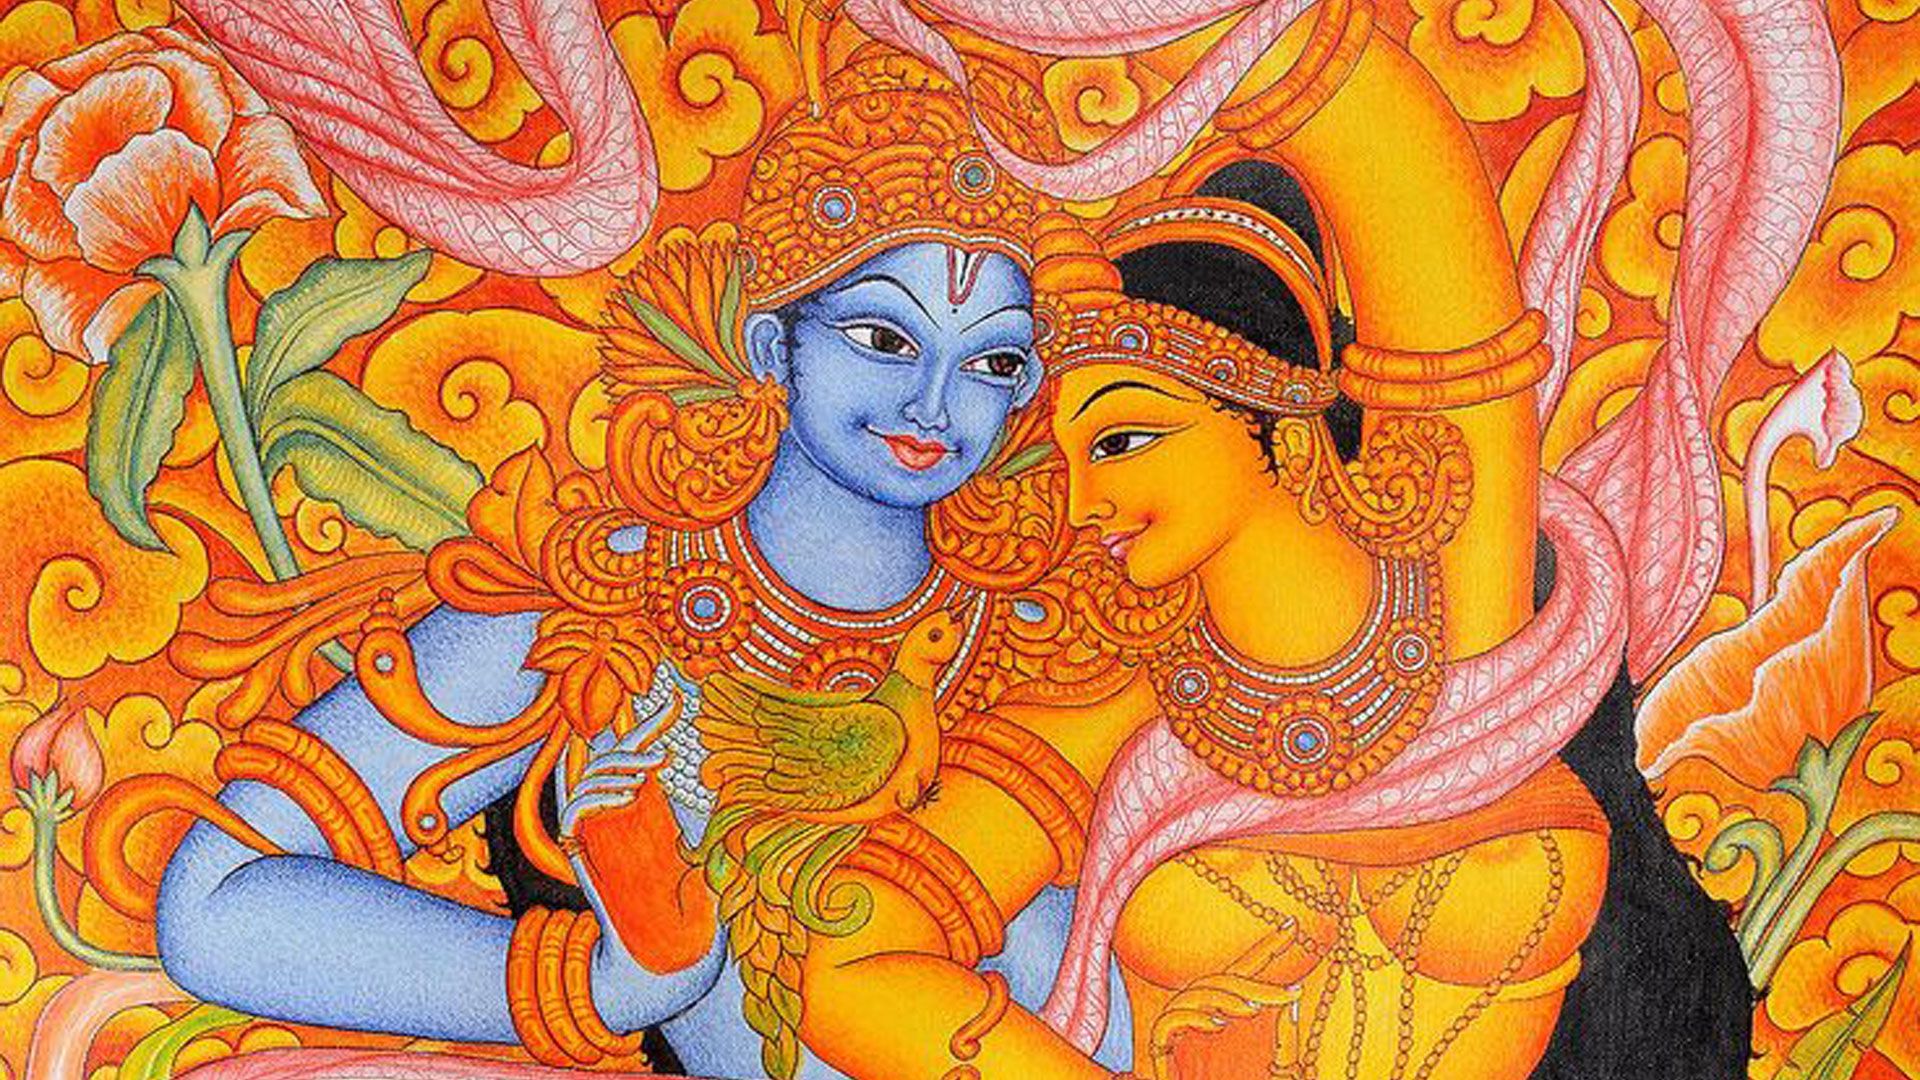 Mural Painting Wallpaper Hd Pics Photos Stunning Attractive Indian Traditional Hindu Mural Painting Old 5 Hd Desktop Background Wallpaper